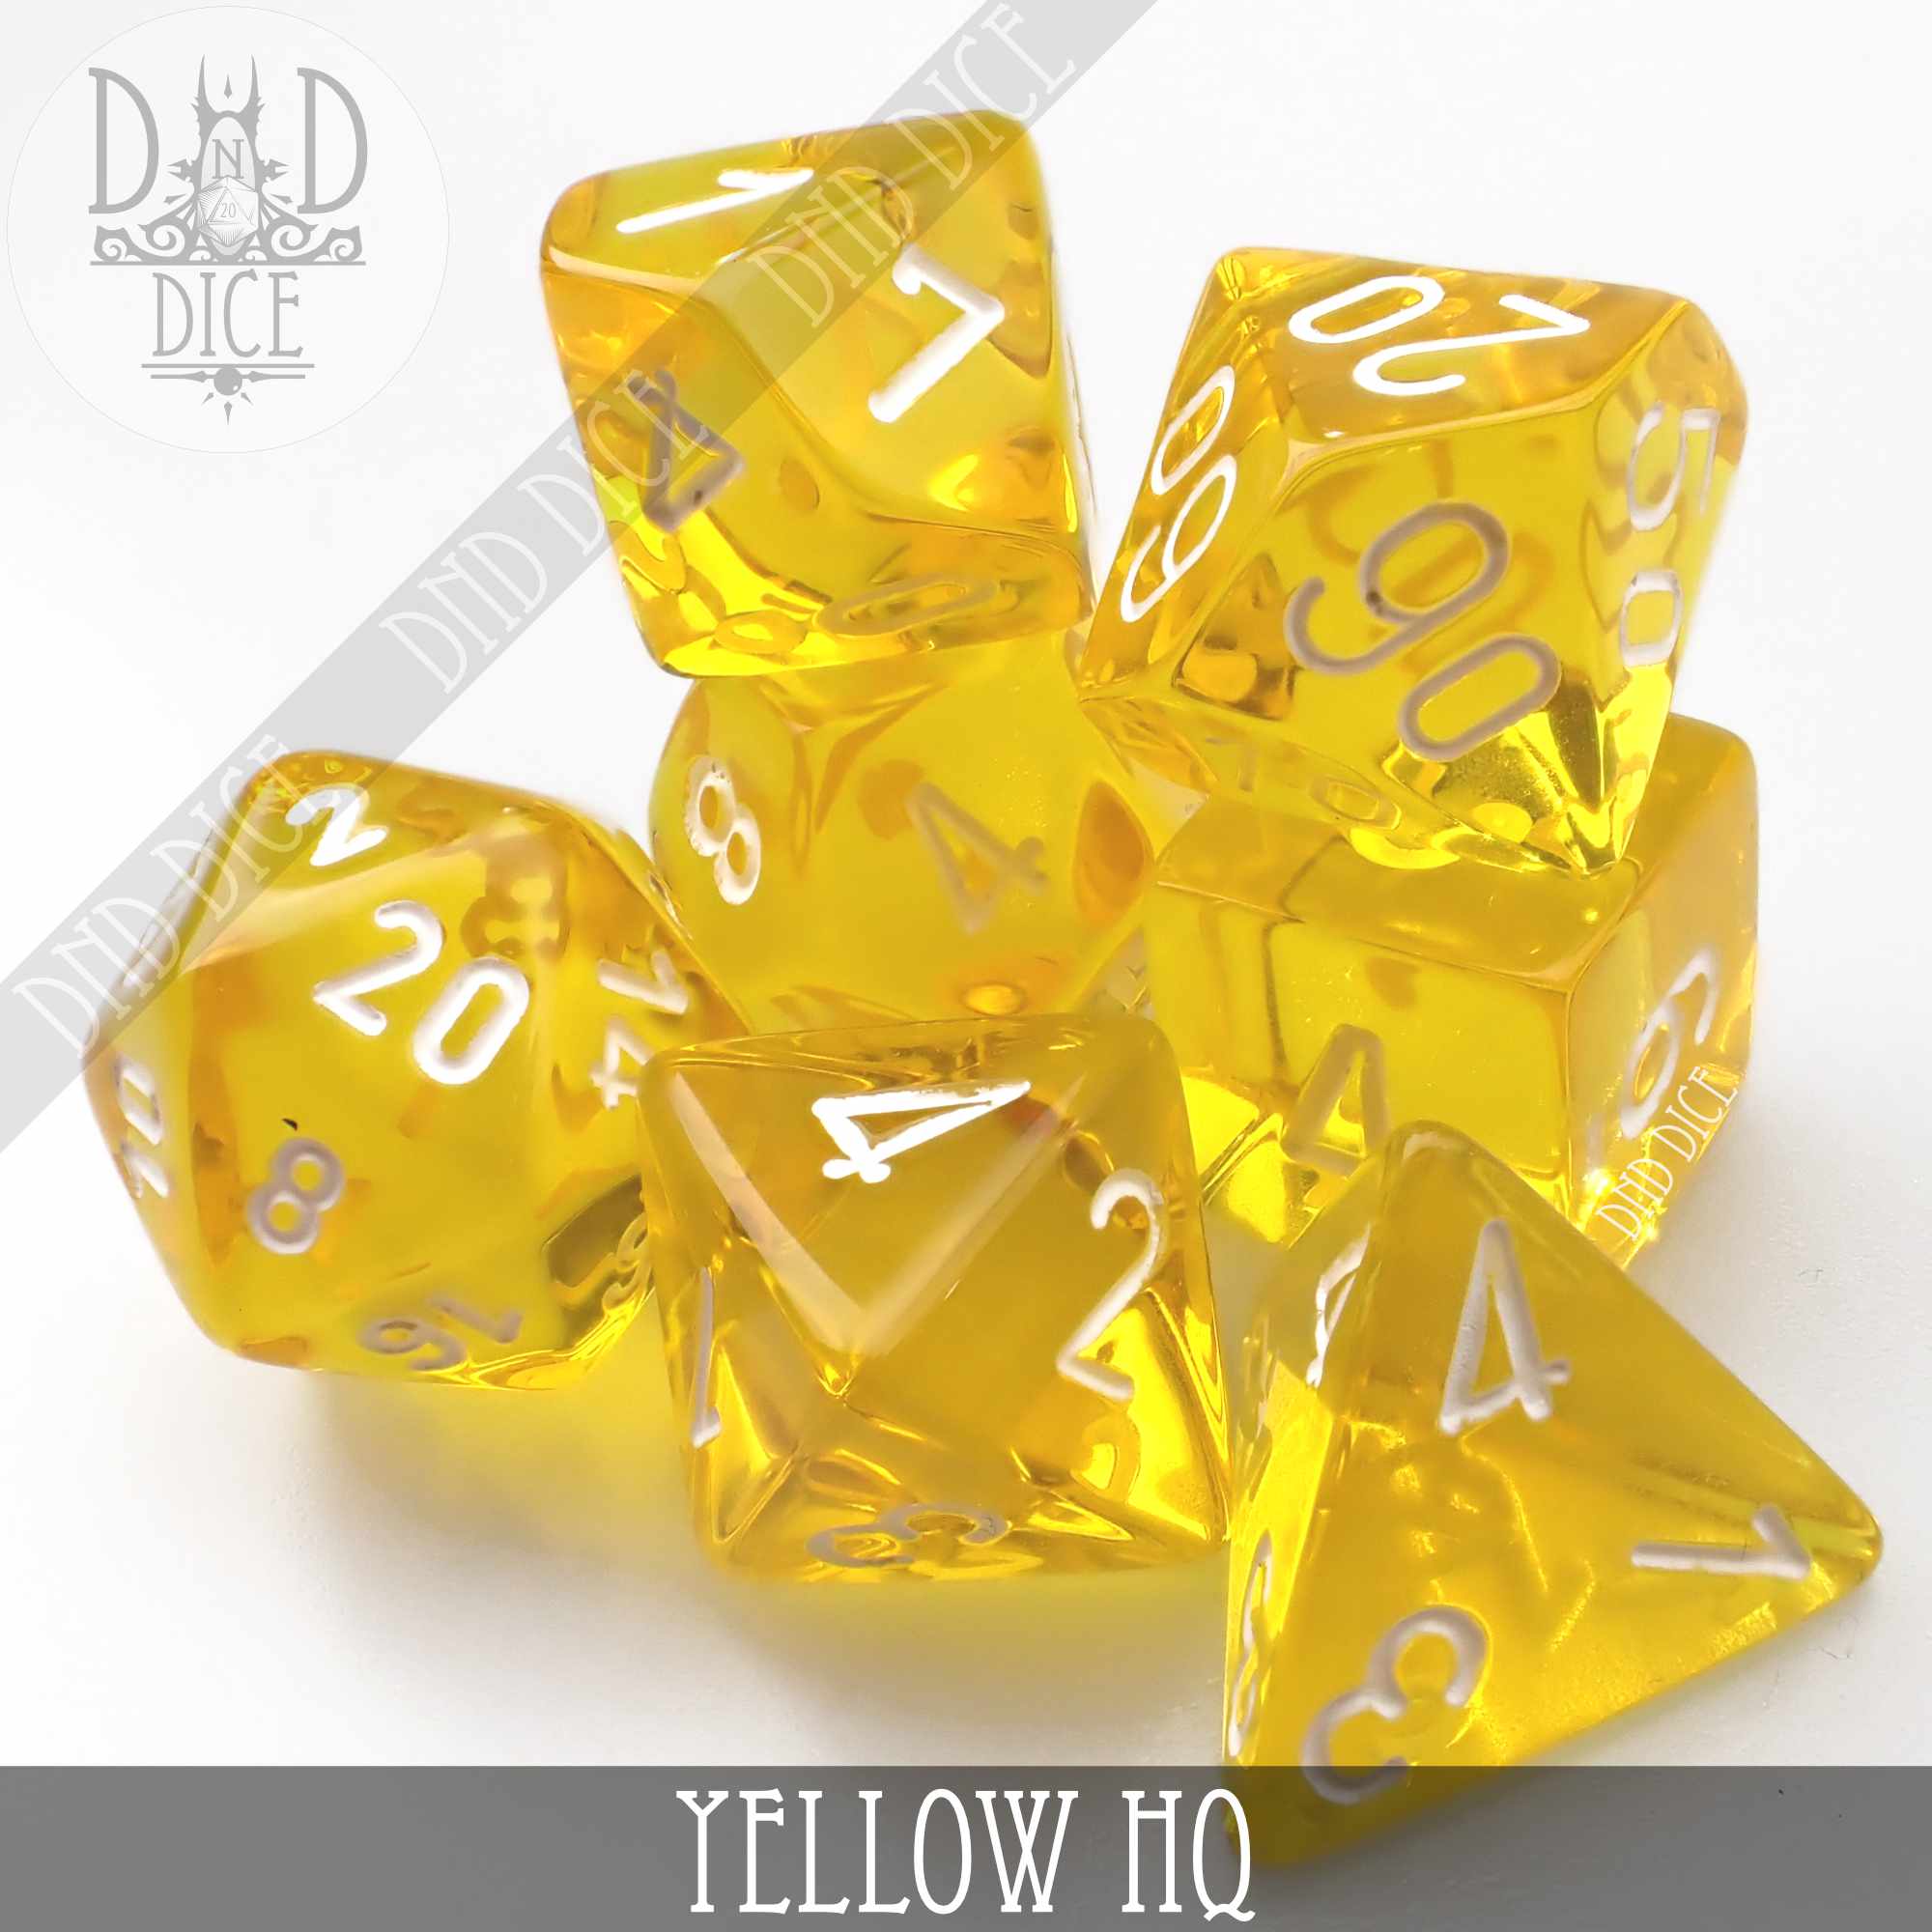 Yellow HQ Build Your Own Set